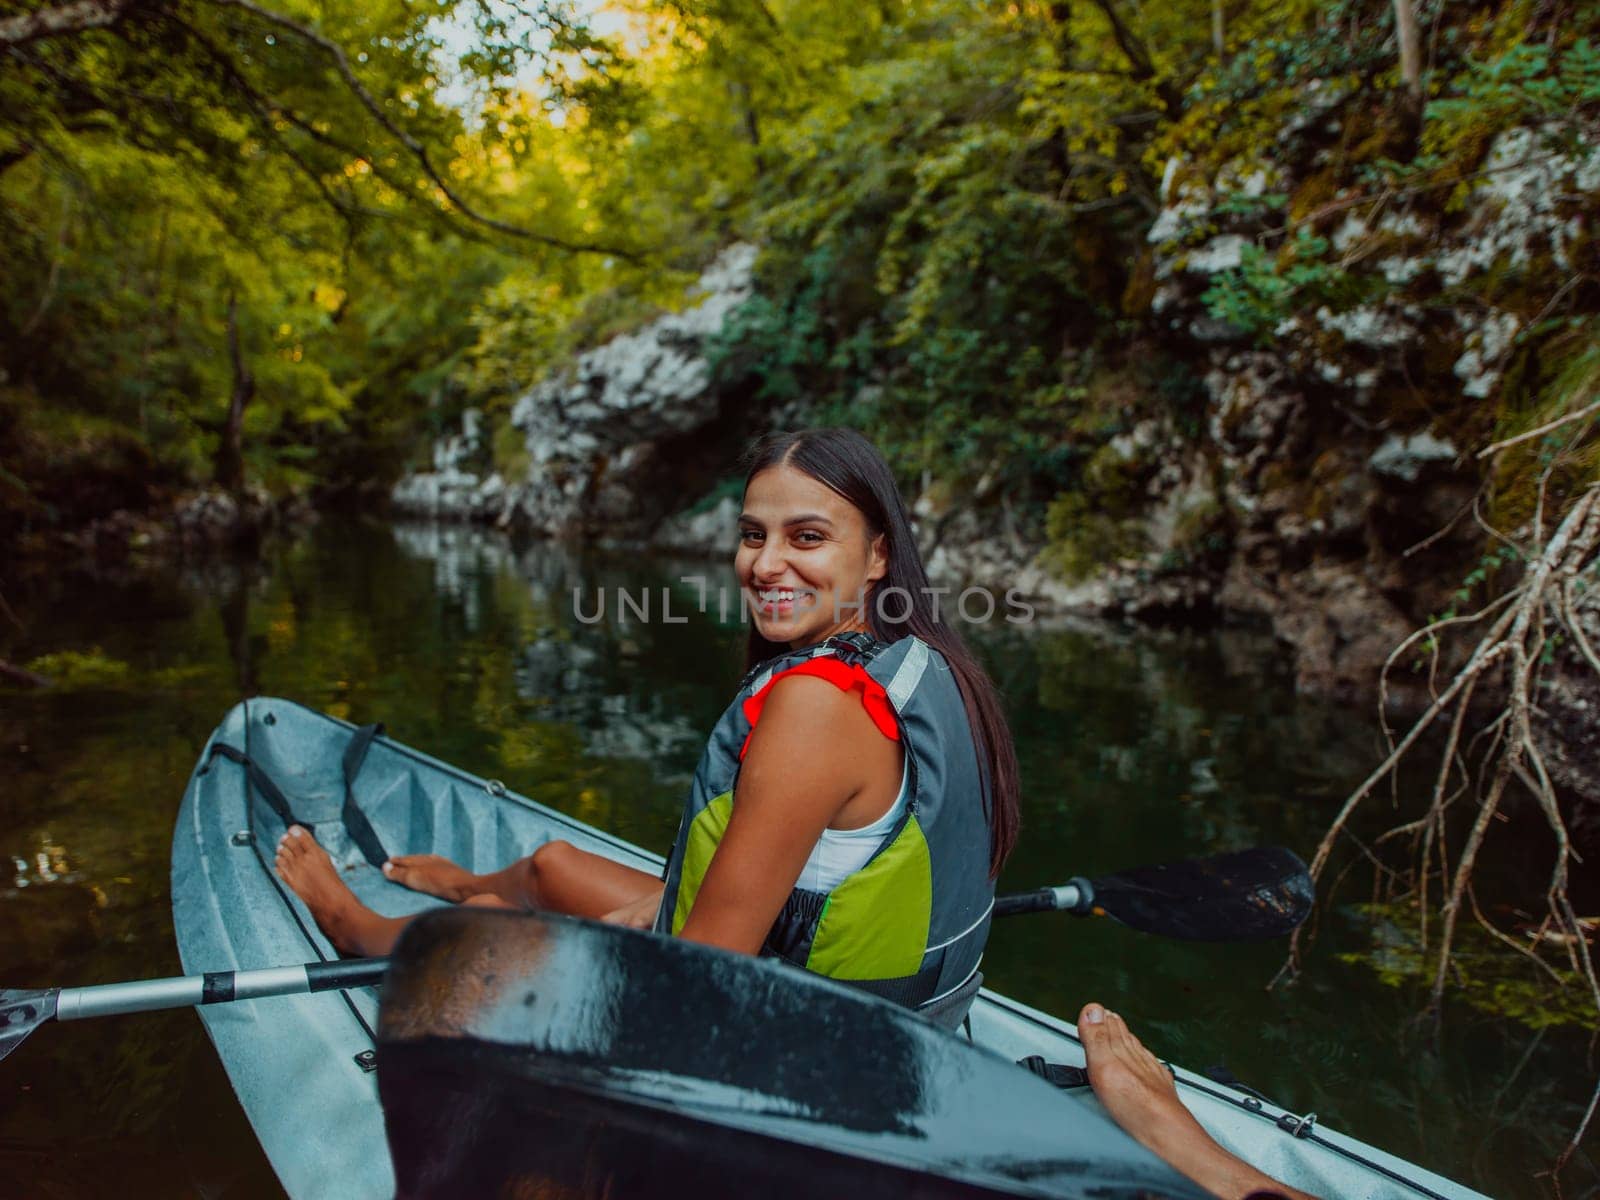 A smiling woman enjoying a relaxing kayak ride with a friend while exploring river canyons by dotshock